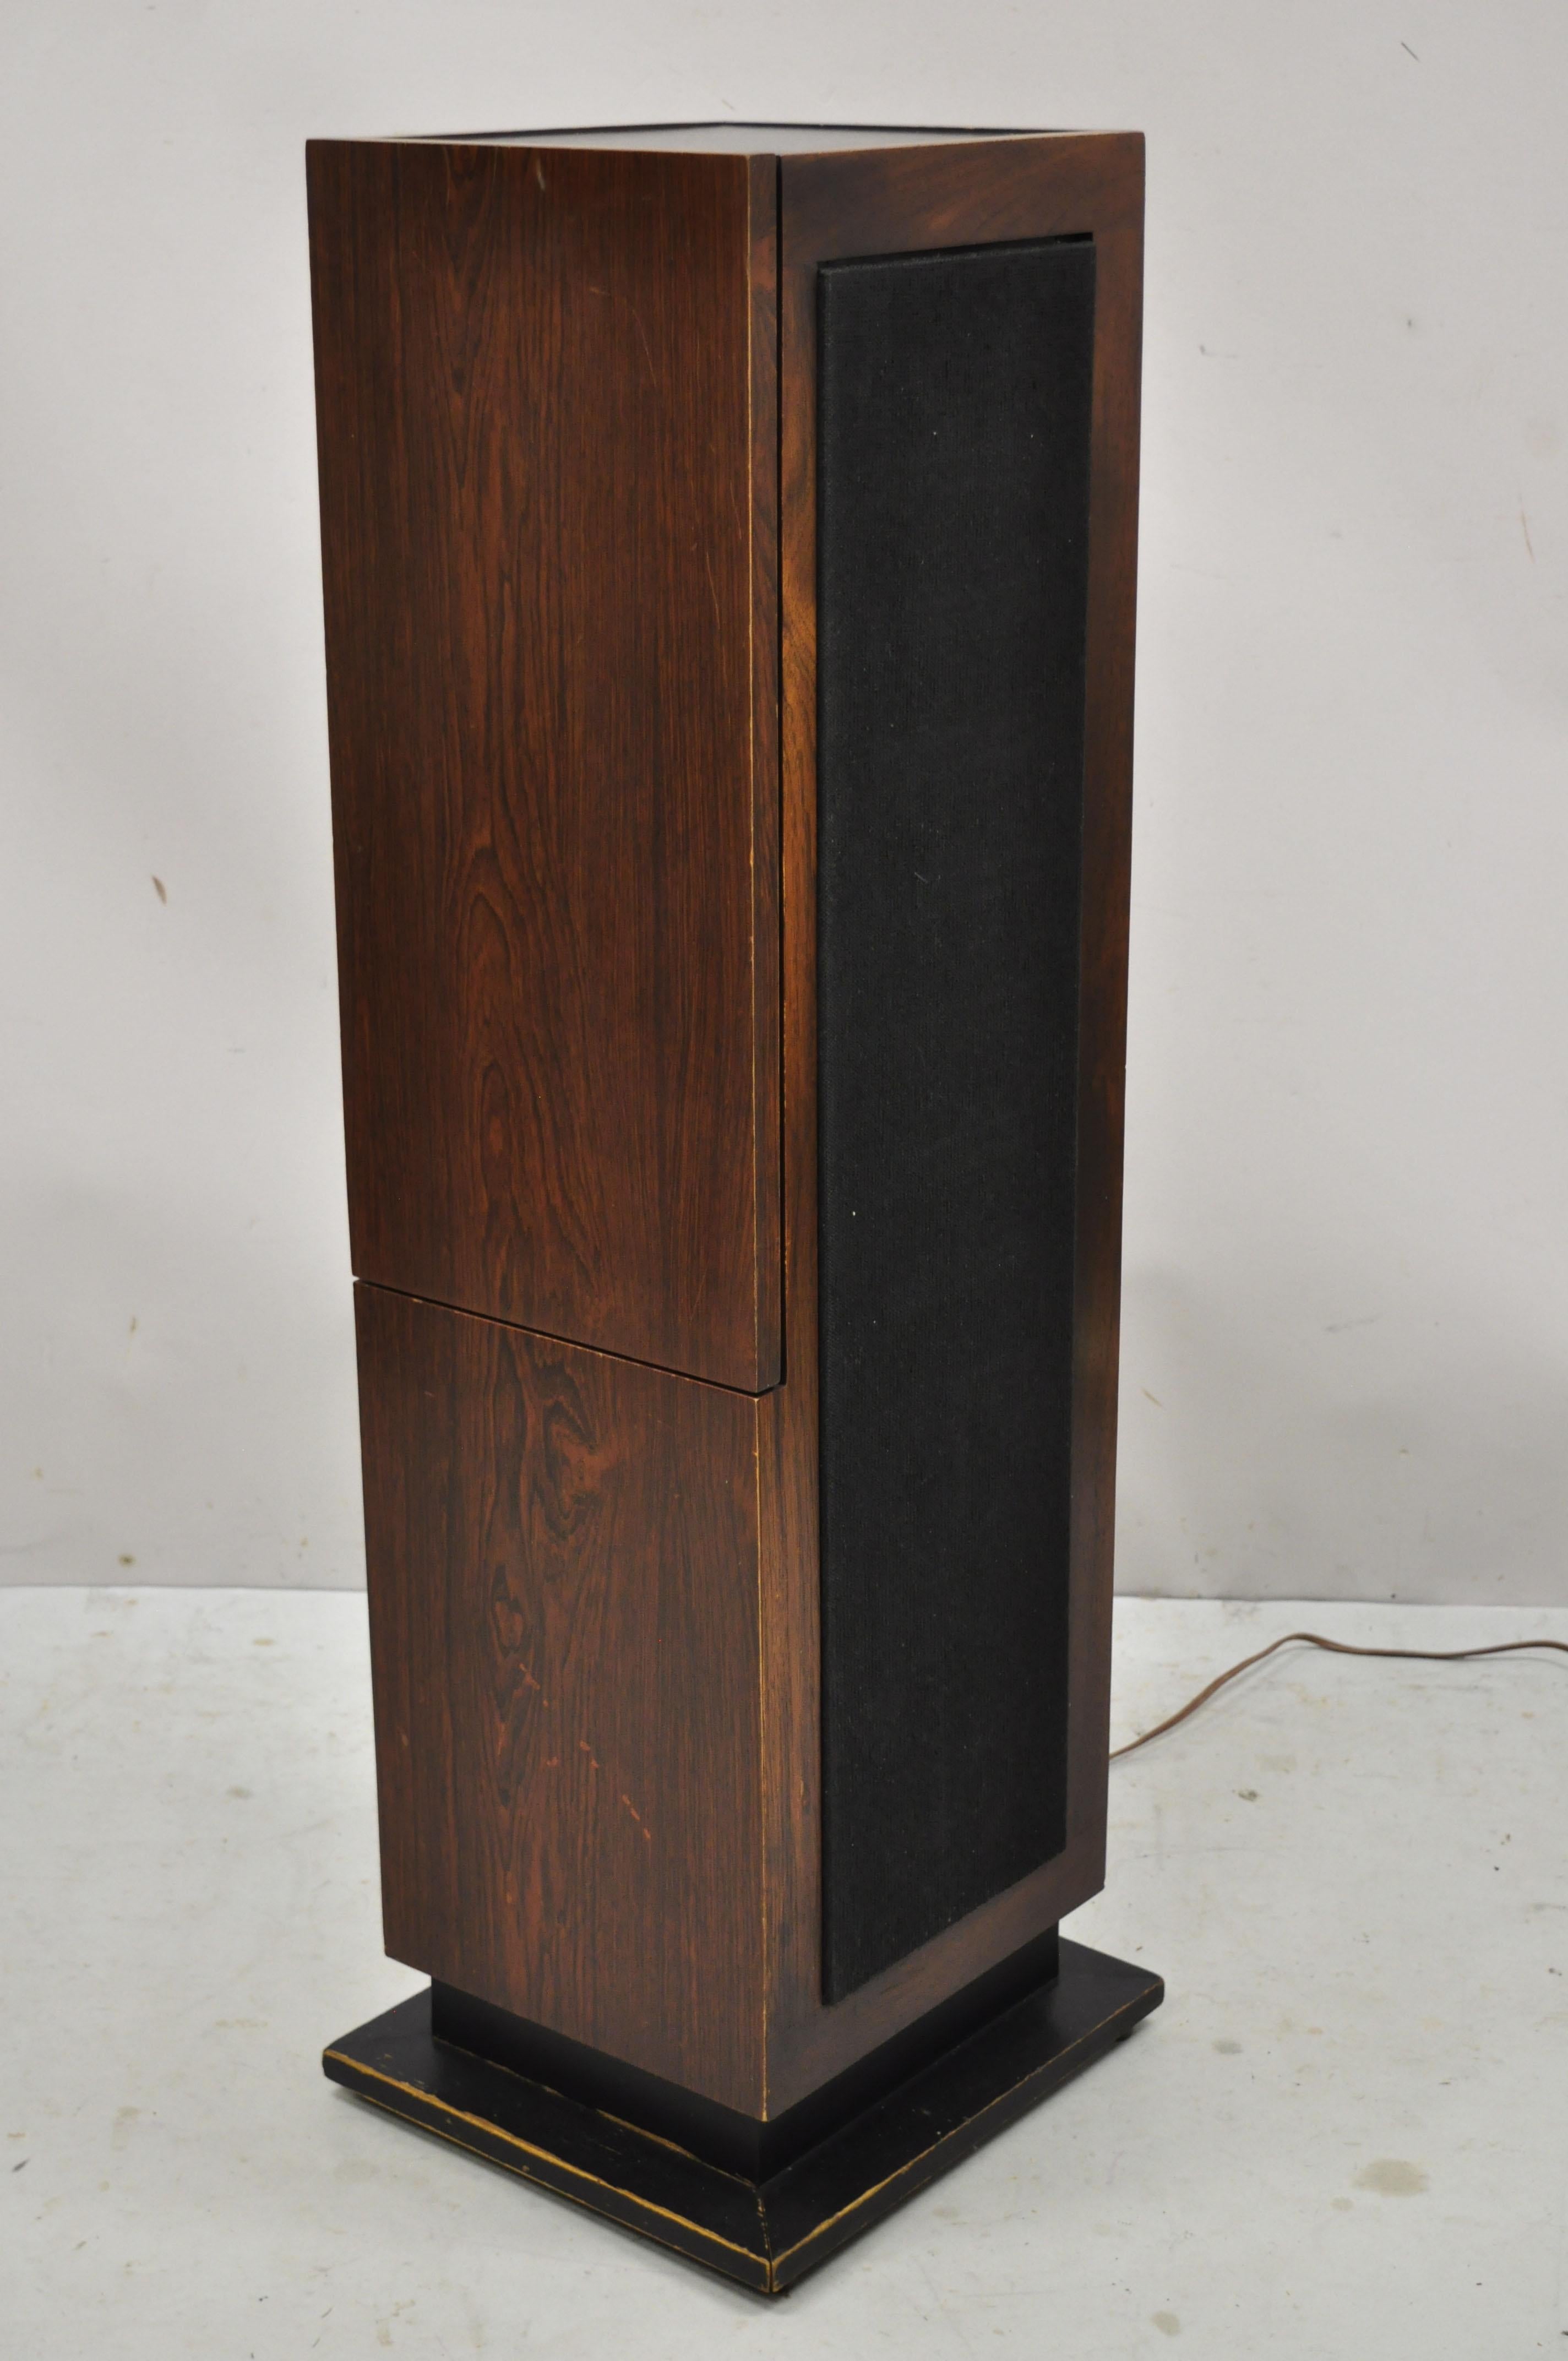 Vintage Magnavox Mid-Century Modern tower column pedestal rodeo stereo 8 track console. Item features working AM/FM radio, side speakers, slate pedestal top, 8 track player (not working), original label, very nice vintage item. Circa 1970s.